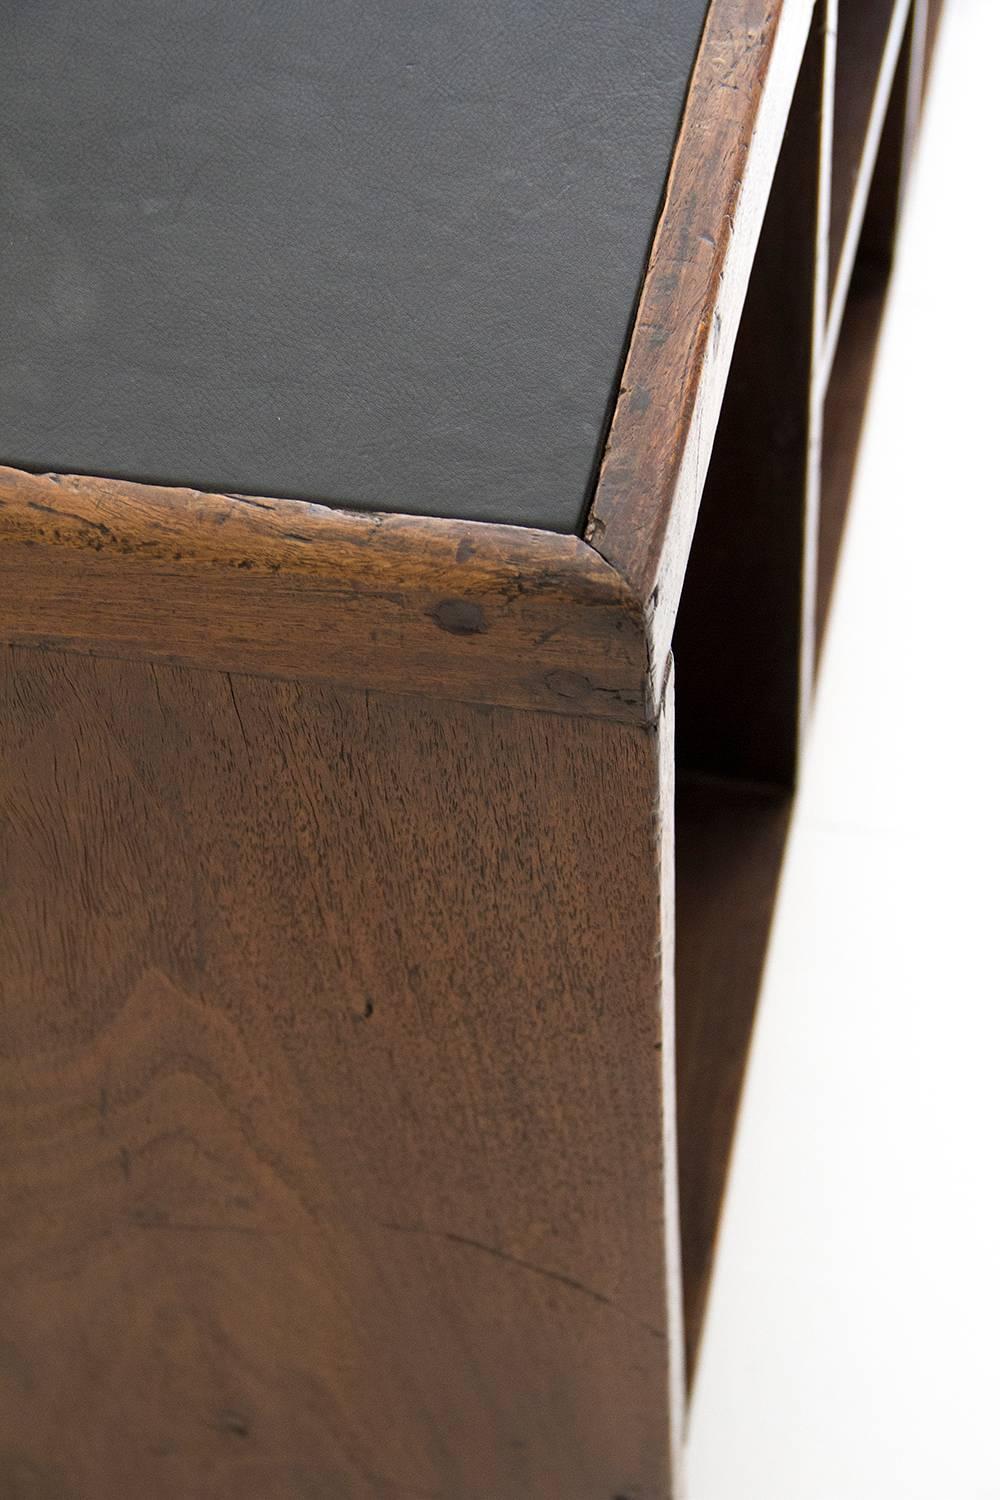 Pierre Jeanneret Office Desk for Chandigarh, Wood and Leather, circa 1950, India 1